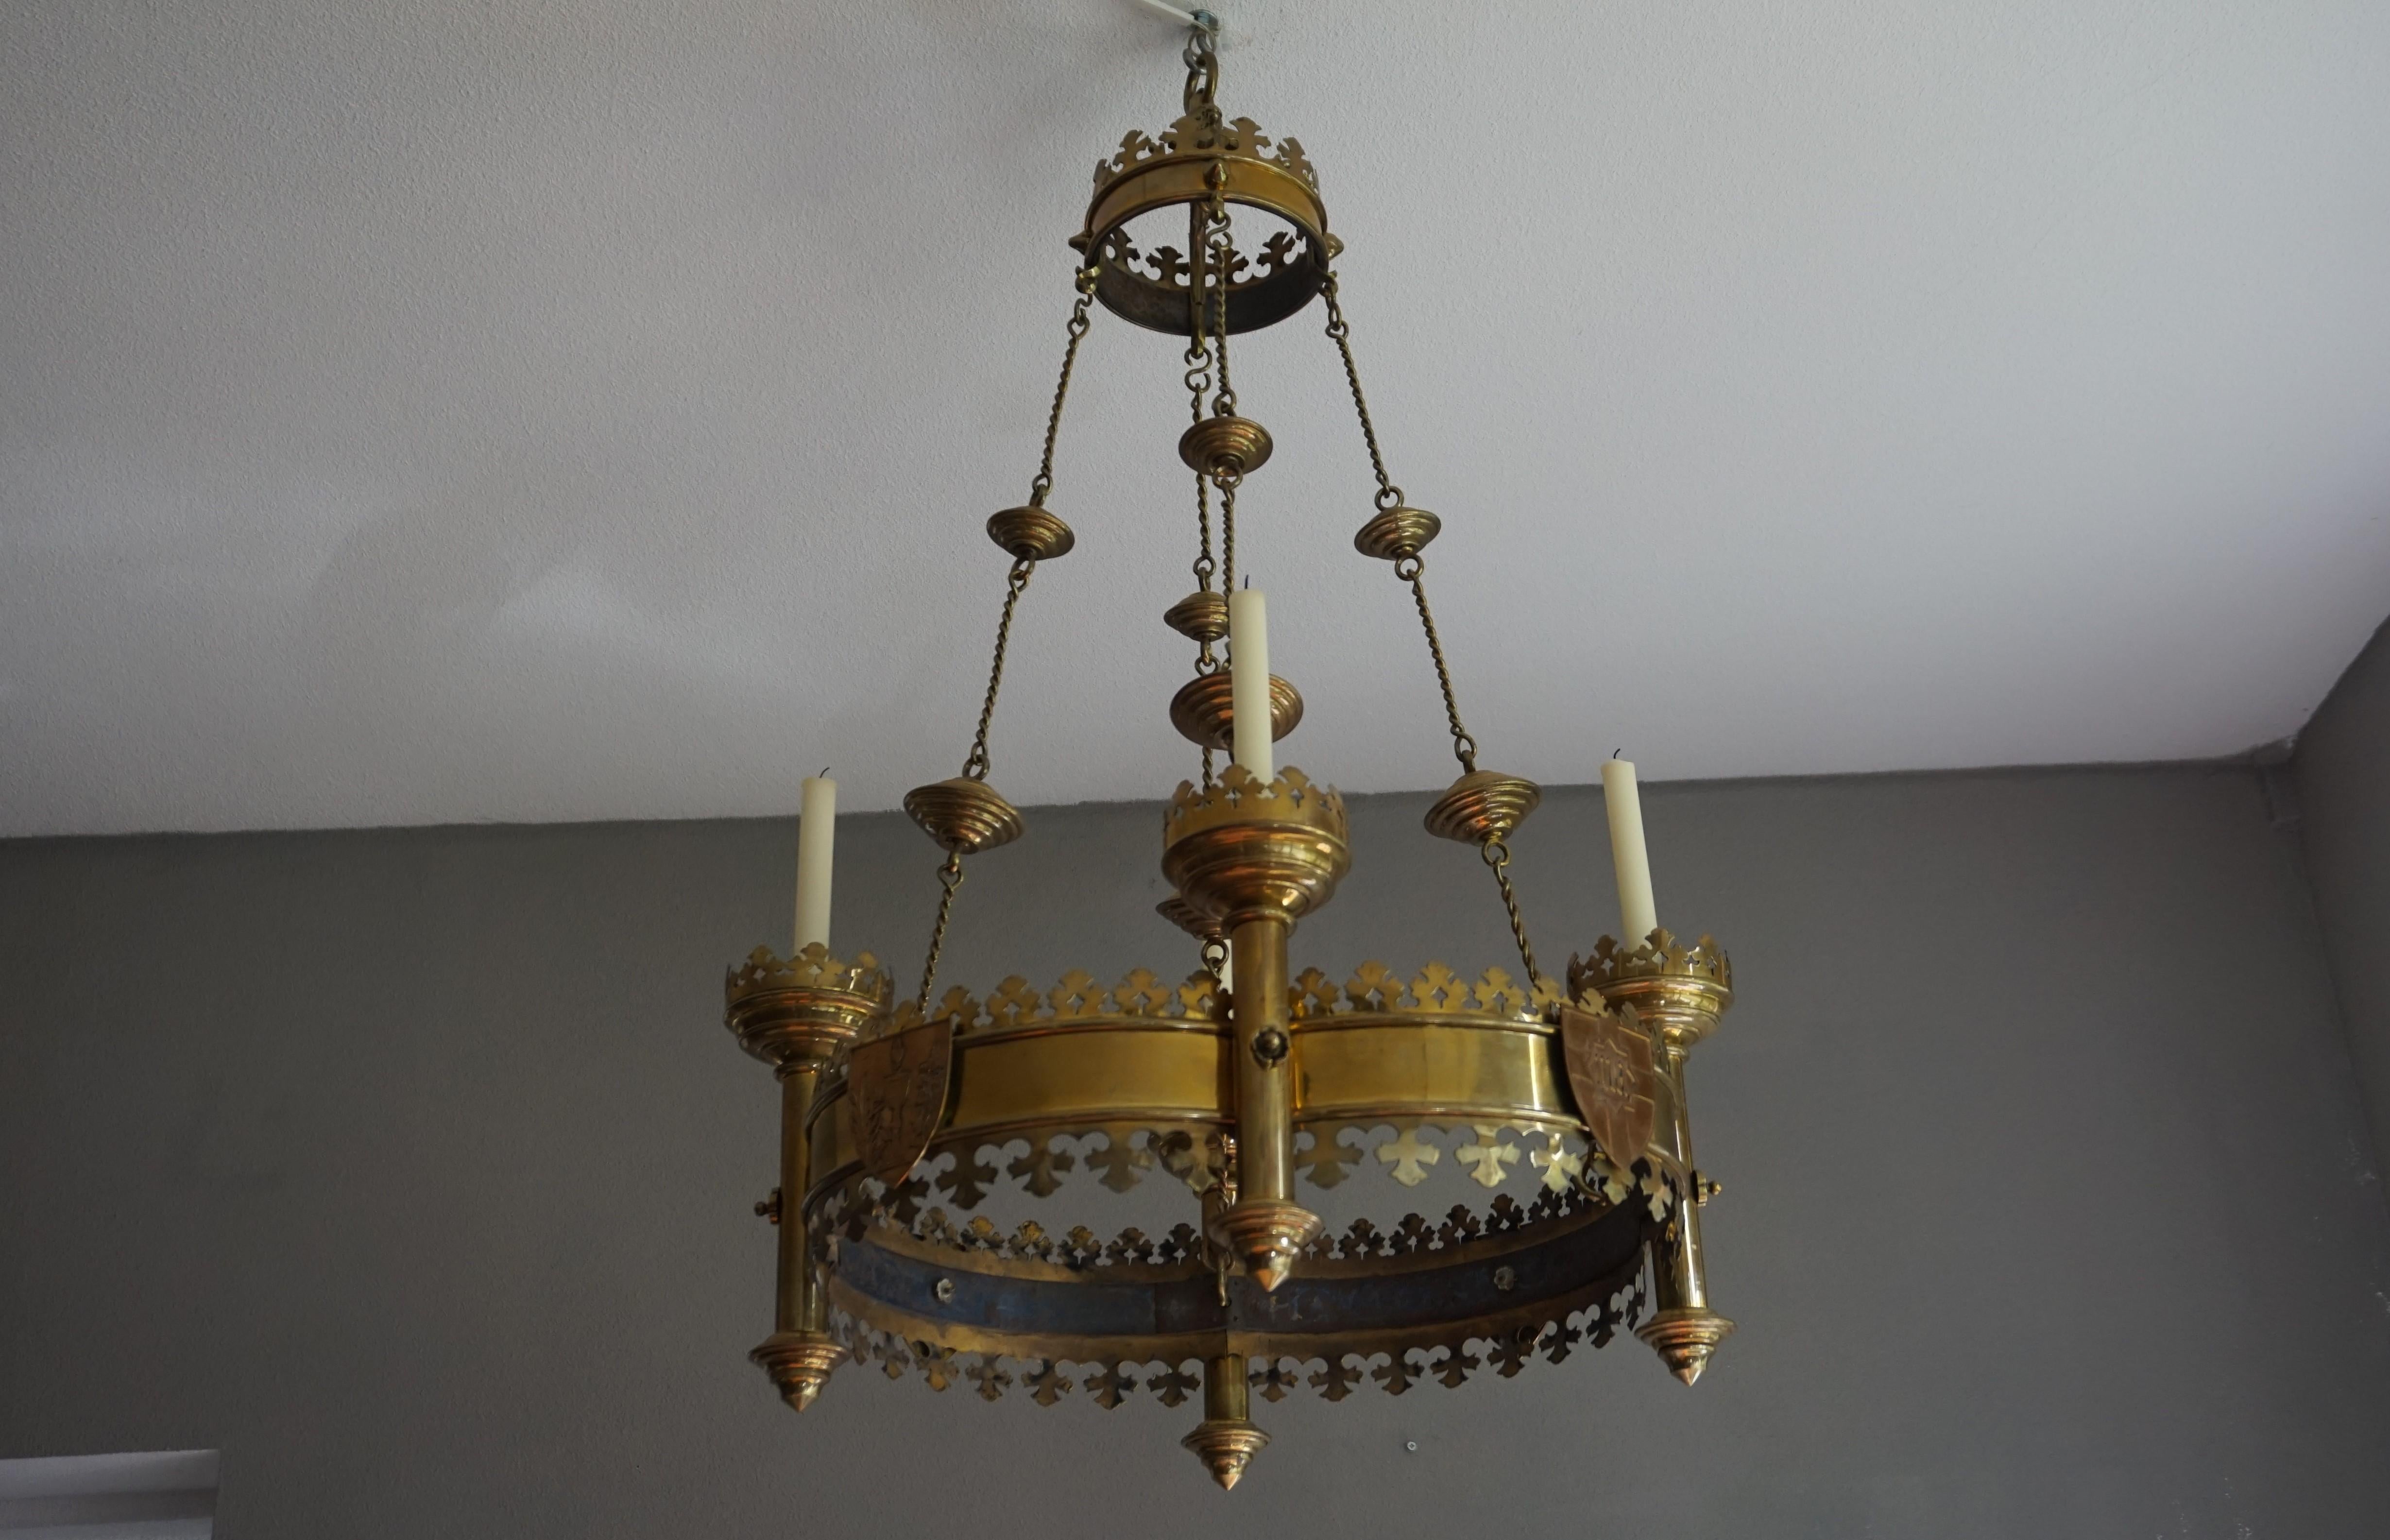 Rare and Striking Bronze & Brass Gothic Revival Advent Wreath Candle Chandelier 12